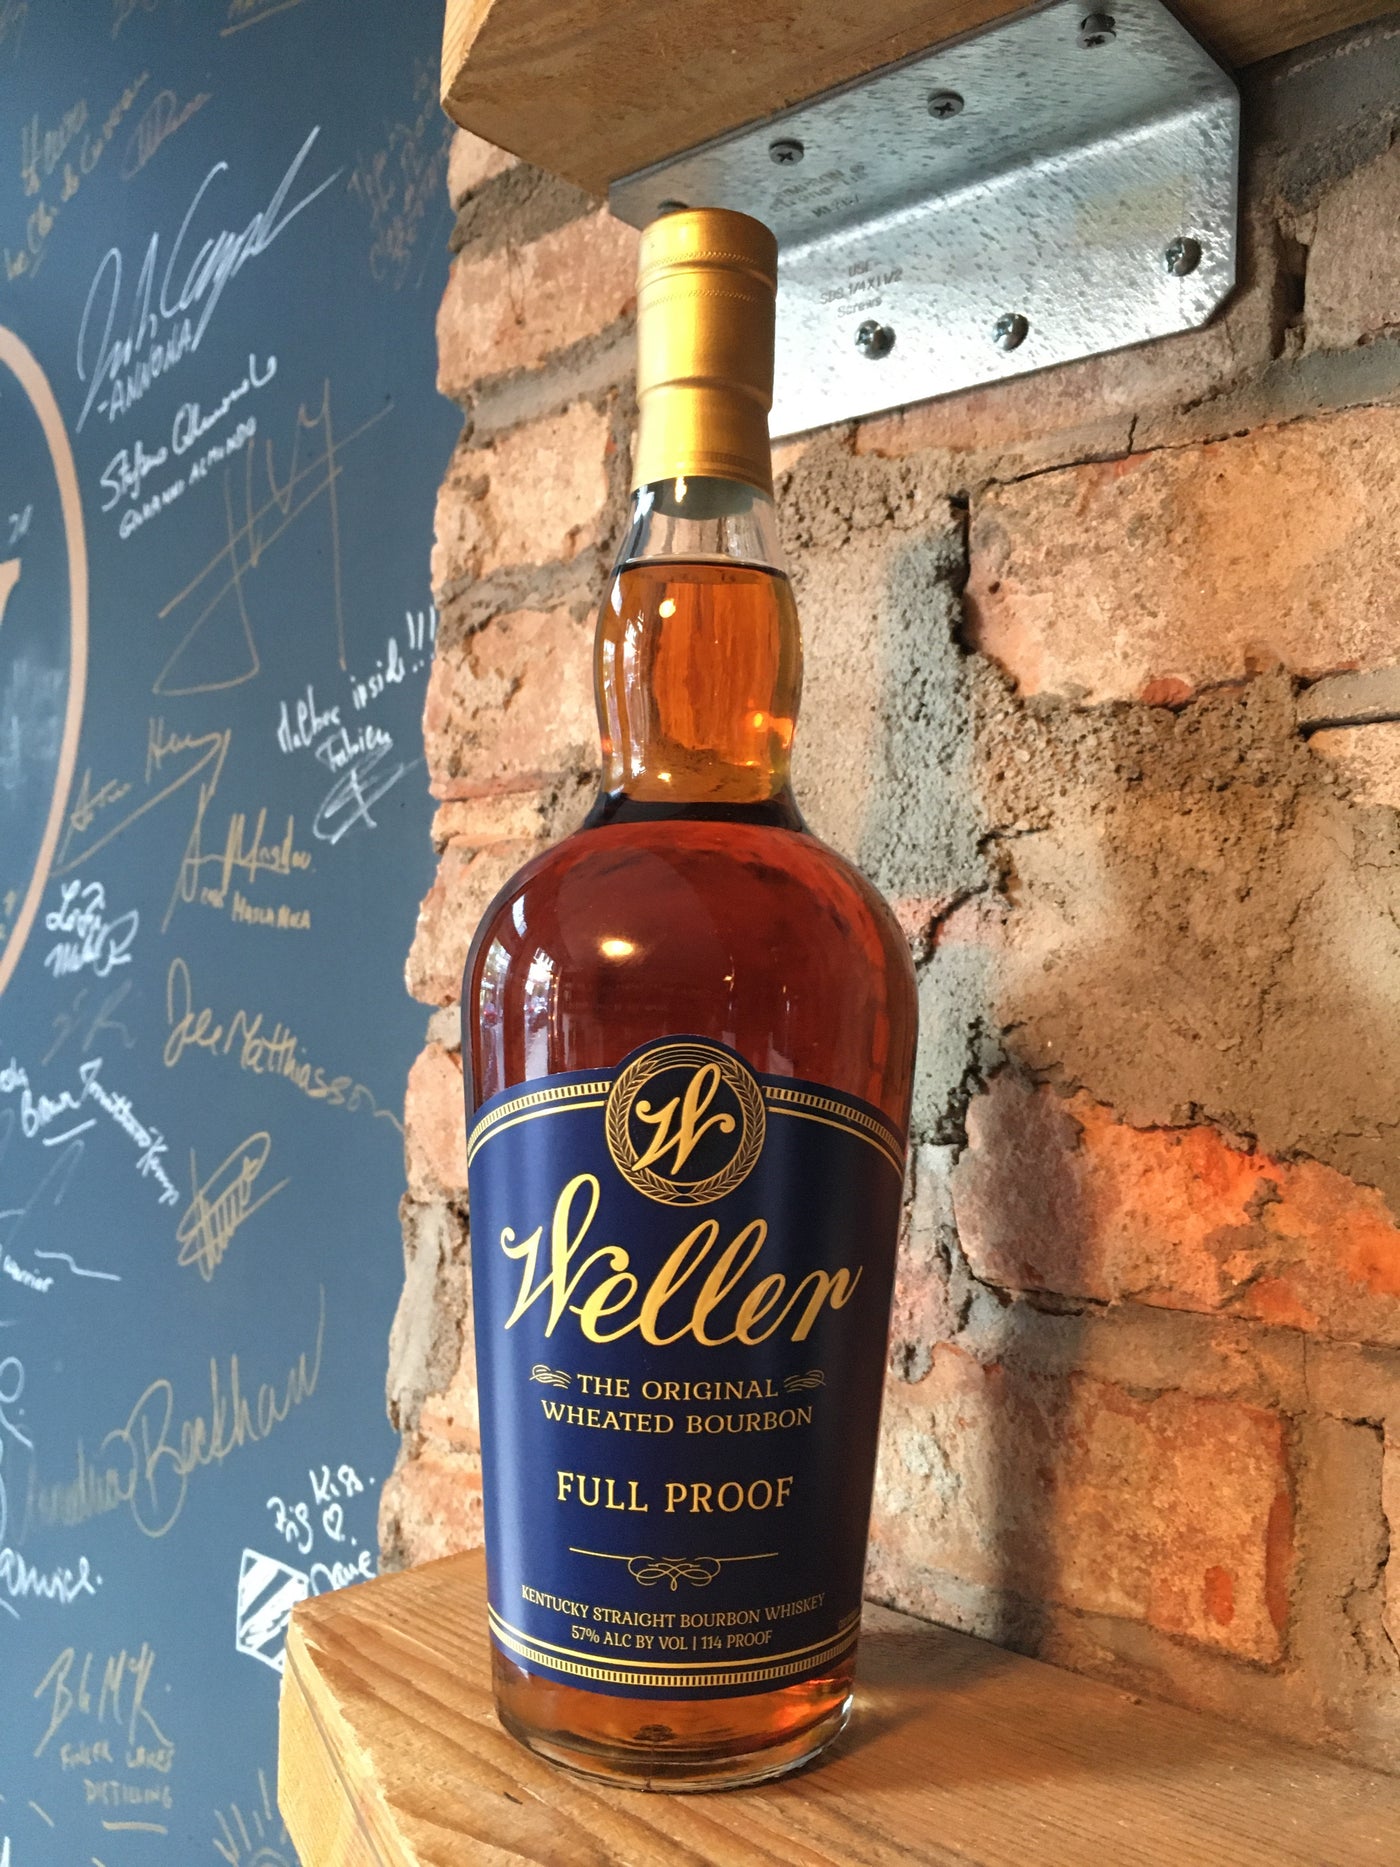 WL Weller Full Proof 114 Wheated Bourbon Whiskey 750ml [NY STATE ONLY]